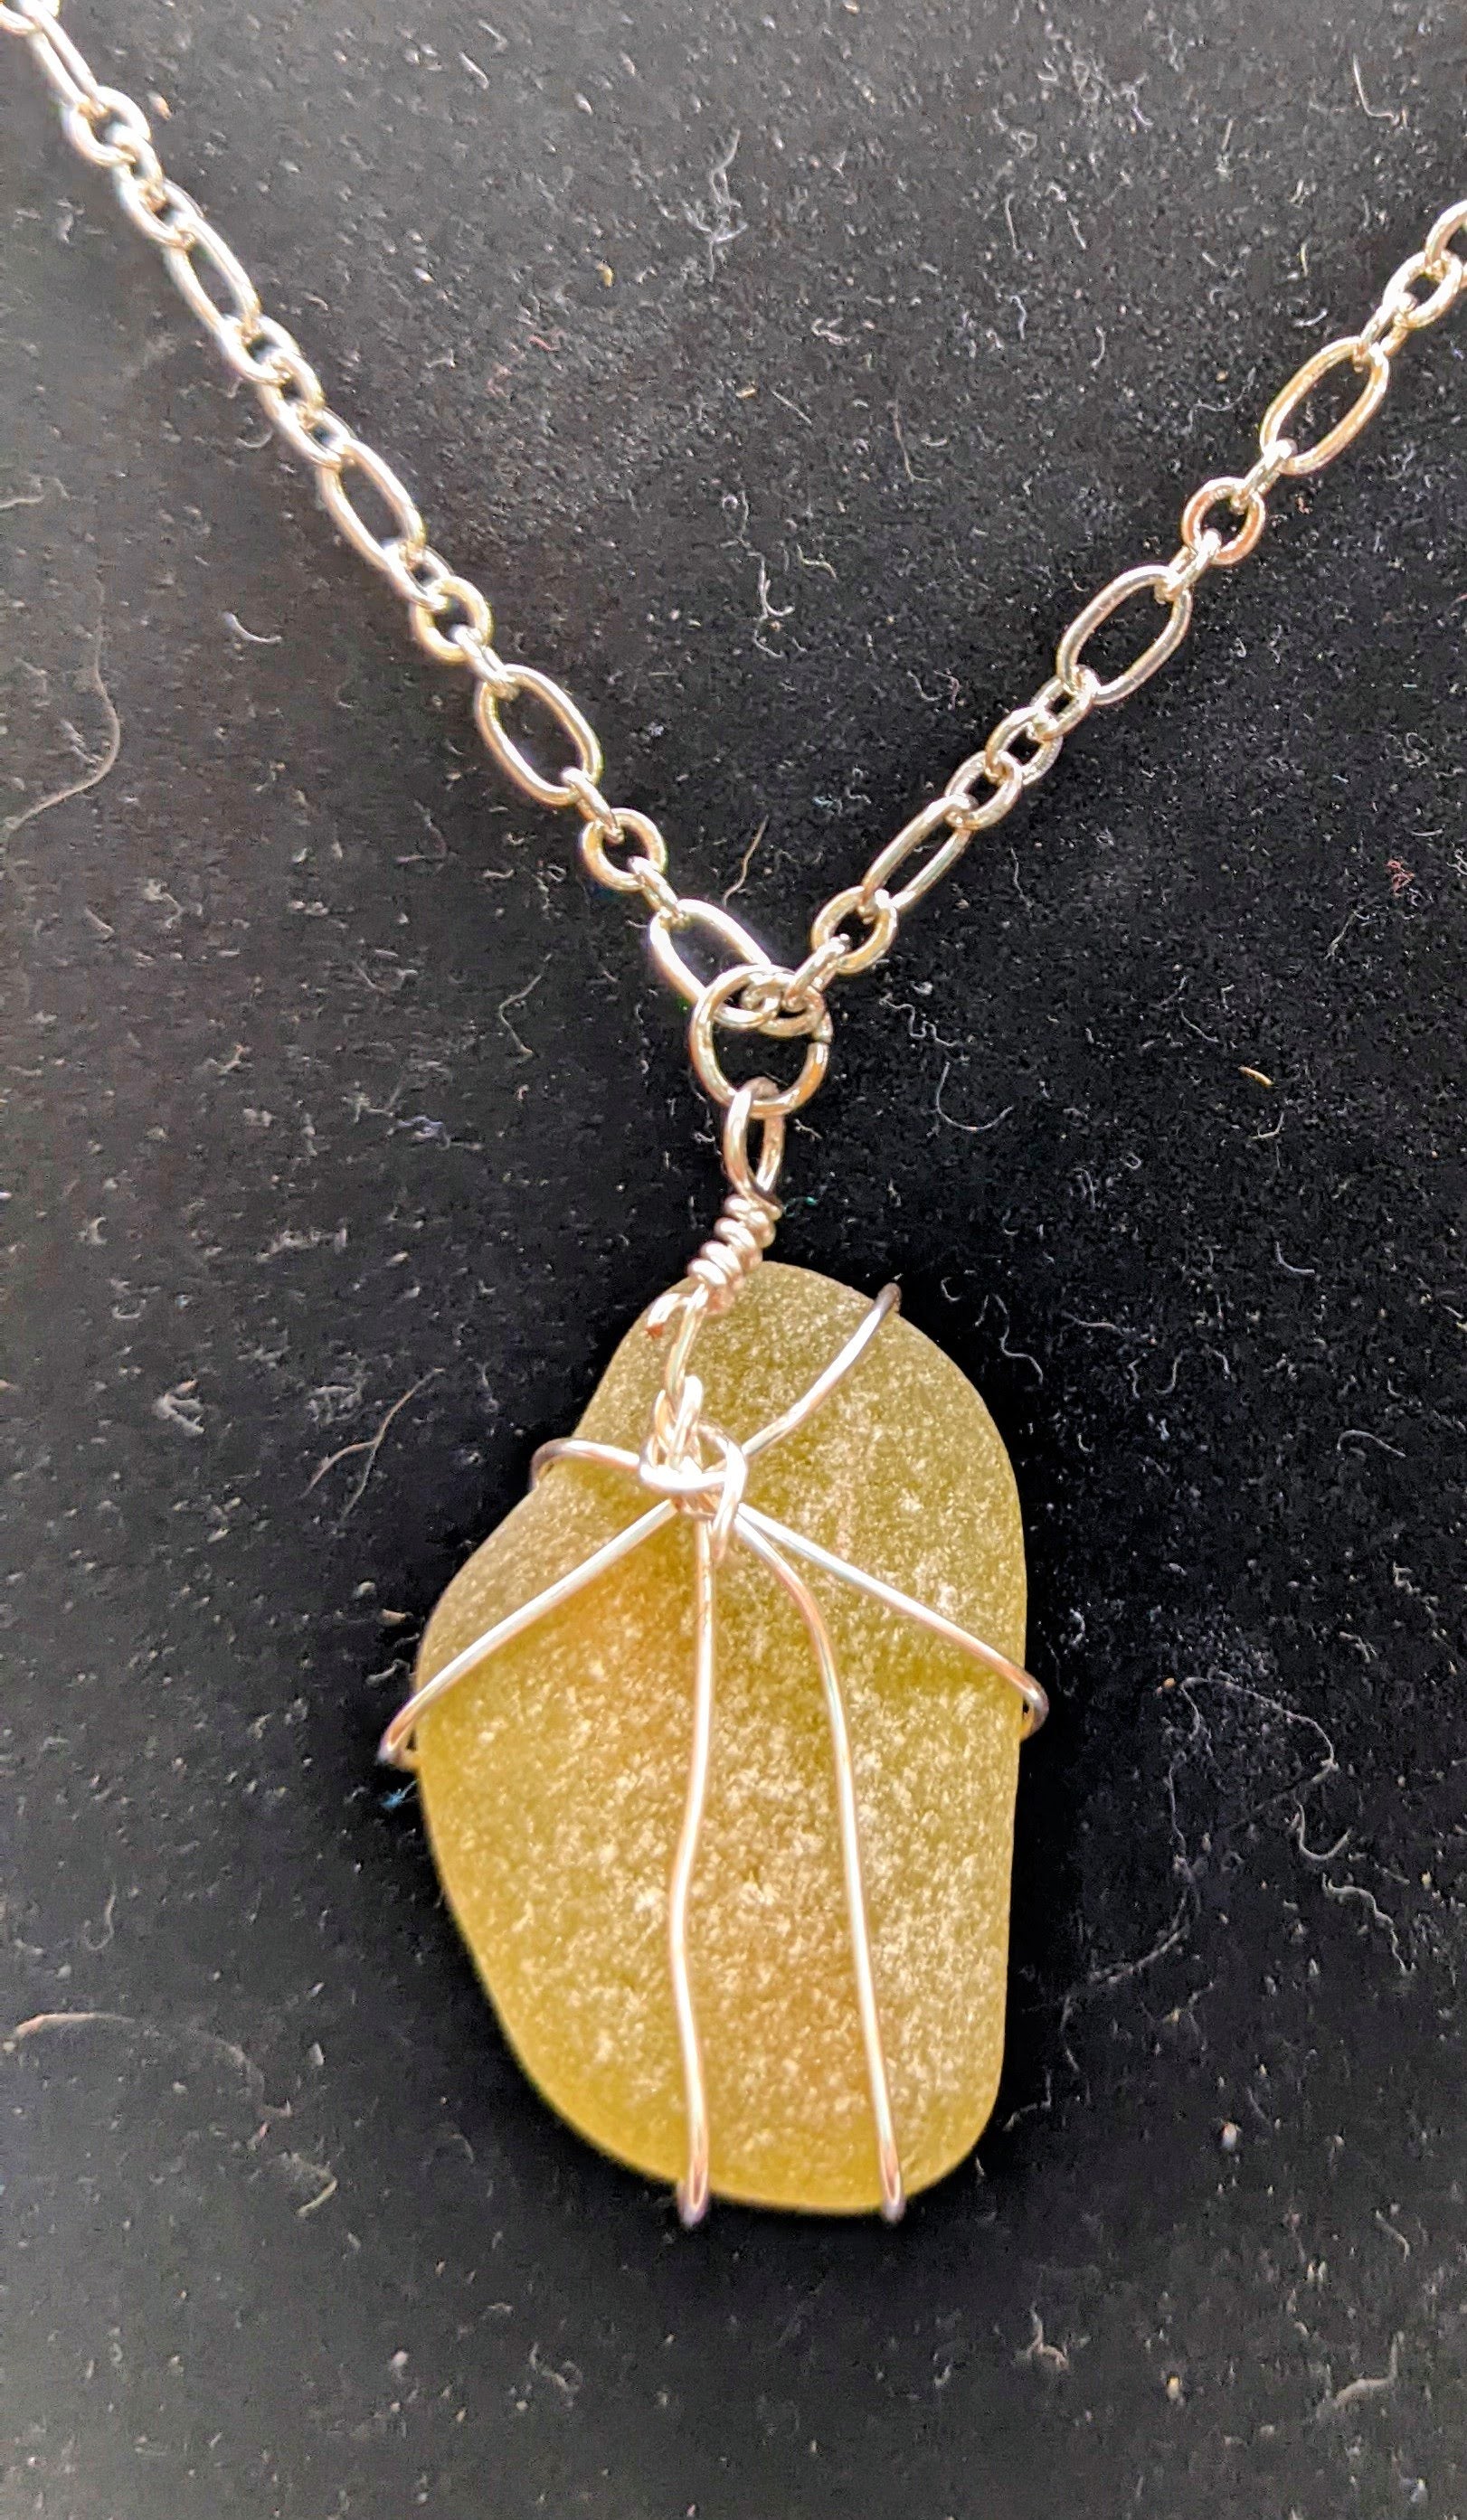 Olive green seaglass and coral beads wire-wrapped necklace